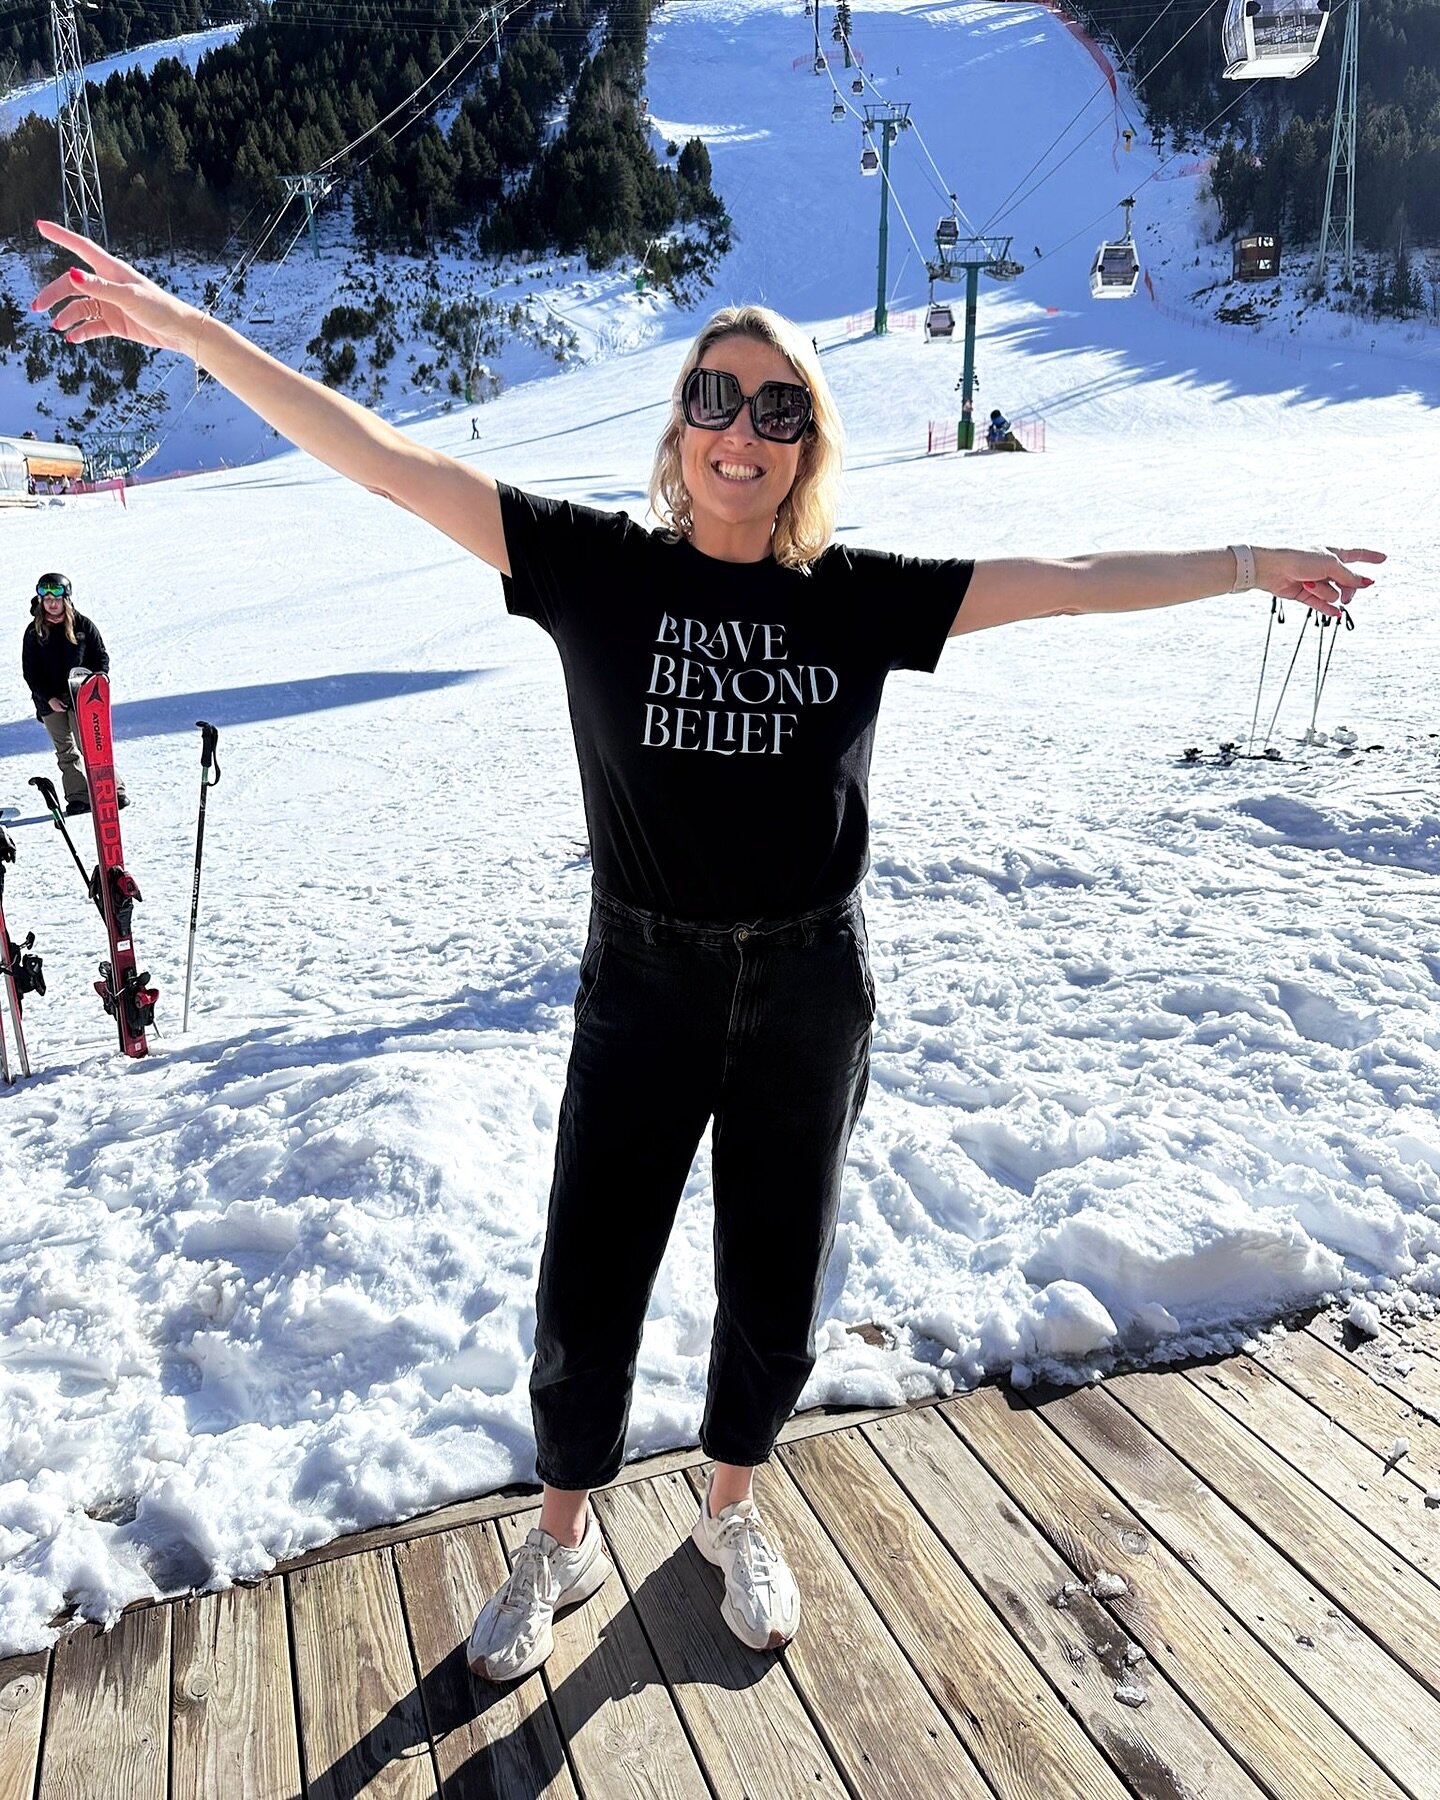 My bootiful friend repping Gold Hearted Club 💛 on the slopes ⛷️ #bravebeyondbelief ~ Shop link in bio 🔝